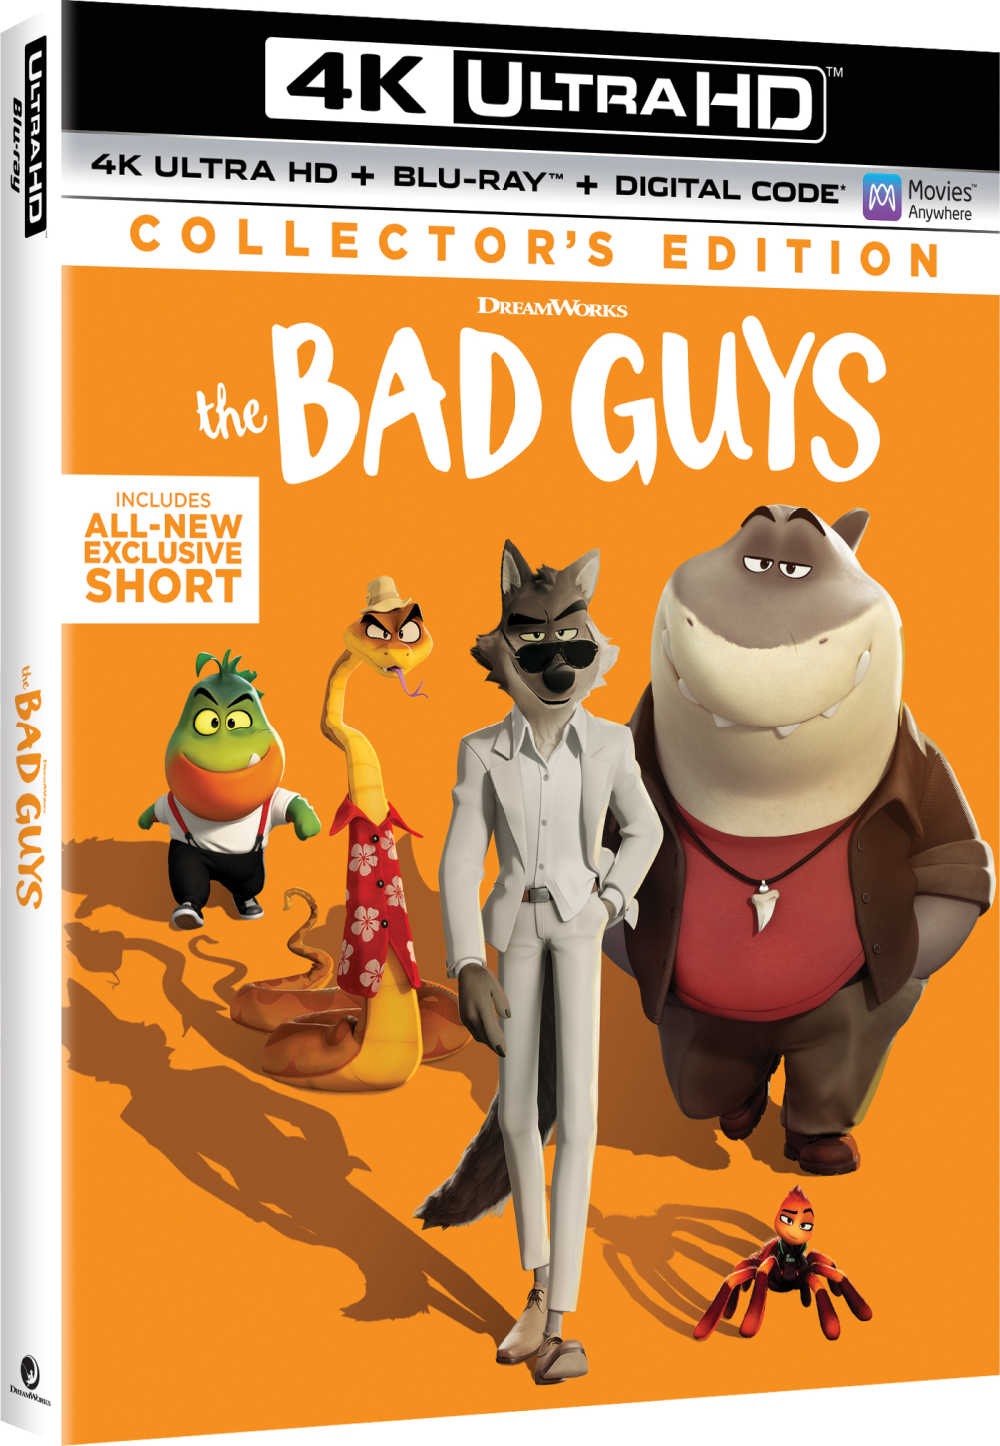 Add The Bad Guys to your home movie collection, so your family can laugh out loud each and every time they watch it.  